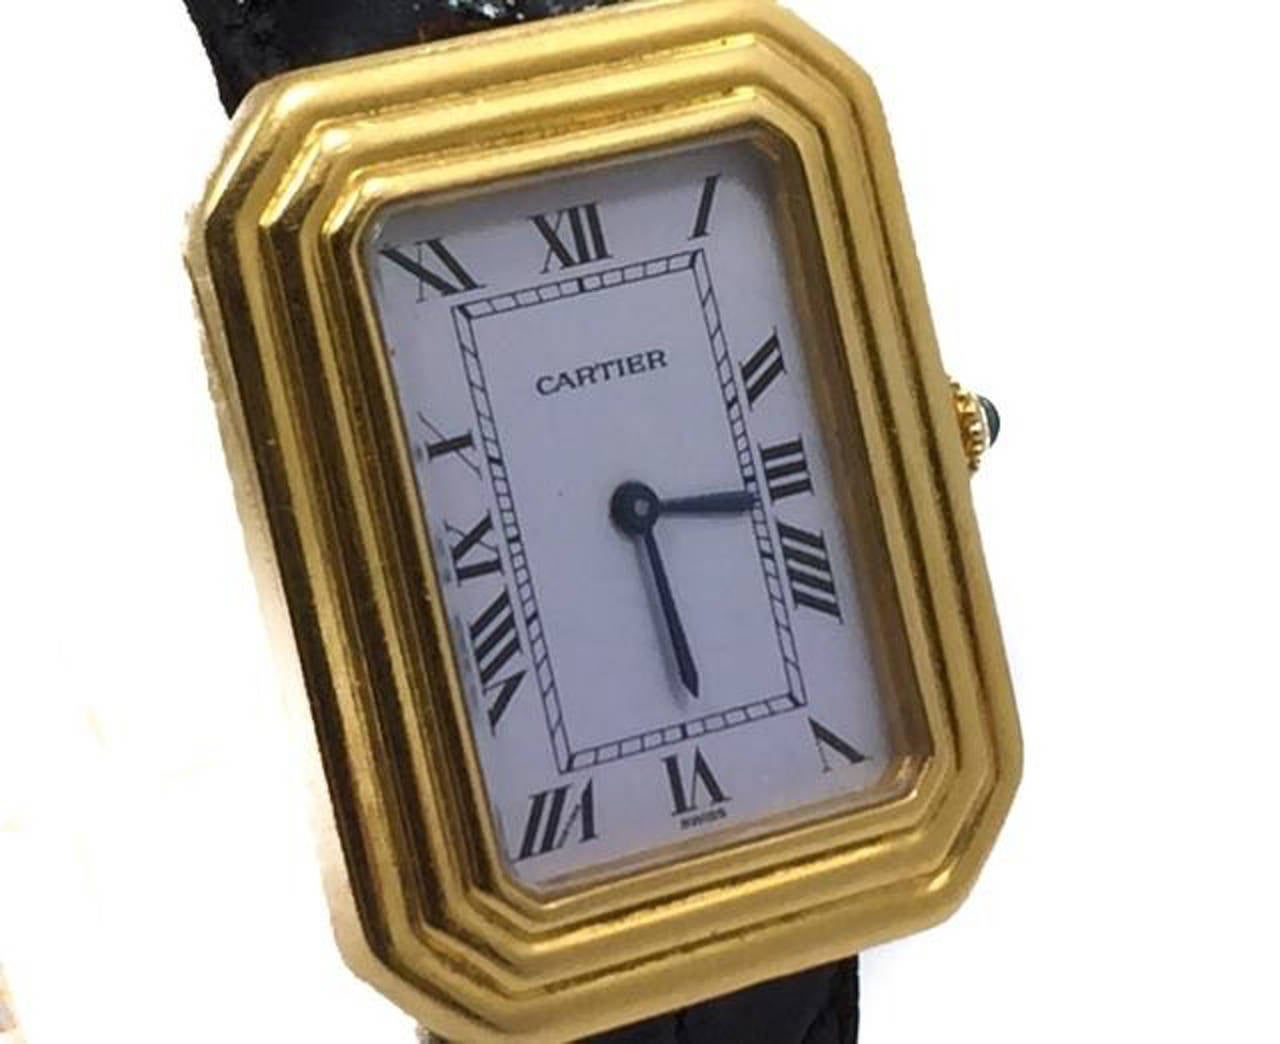 Mens Vintage Cartier XL Tank CRISTALLOR in 18k Solid Yellow Gold Watch on Cartier Strap w/ 18k Deployment Buckle. The Watch Is in Great Condition and Its Mechanical Wind Movement is Keeping Great Time. Sorry I do not have box or papers.